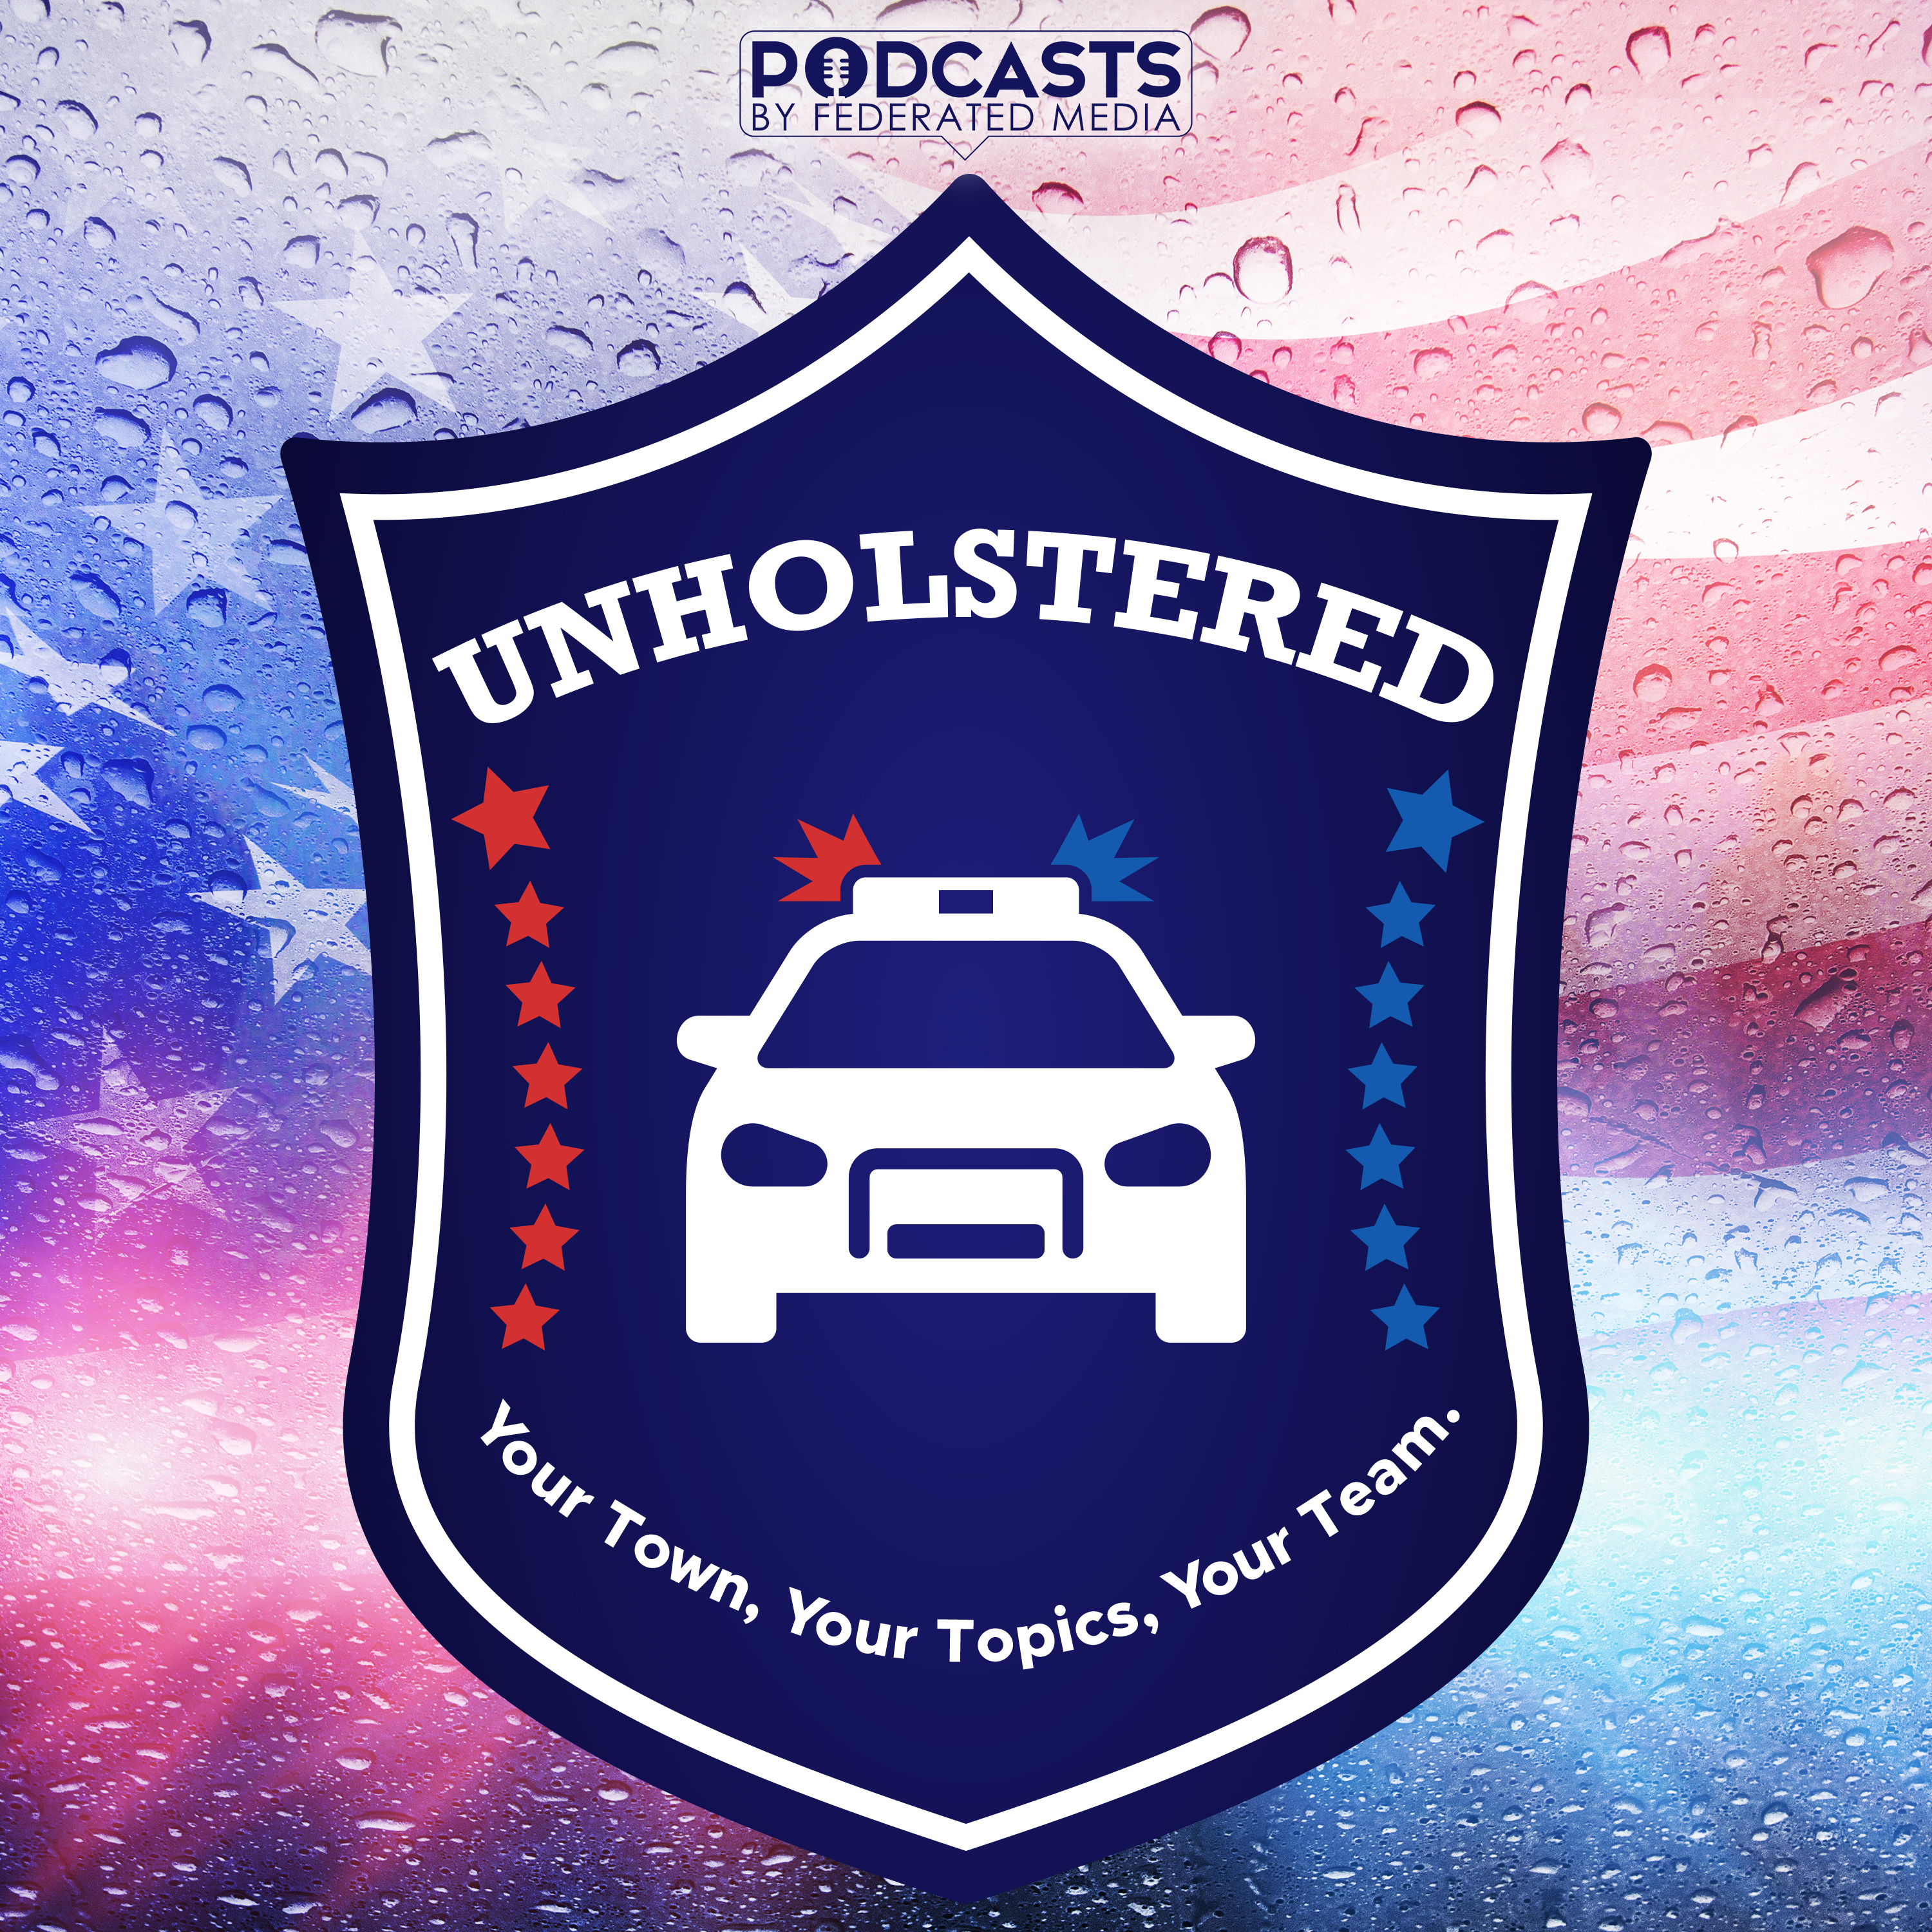 Ep 115: Differentiating Emergency Alerts